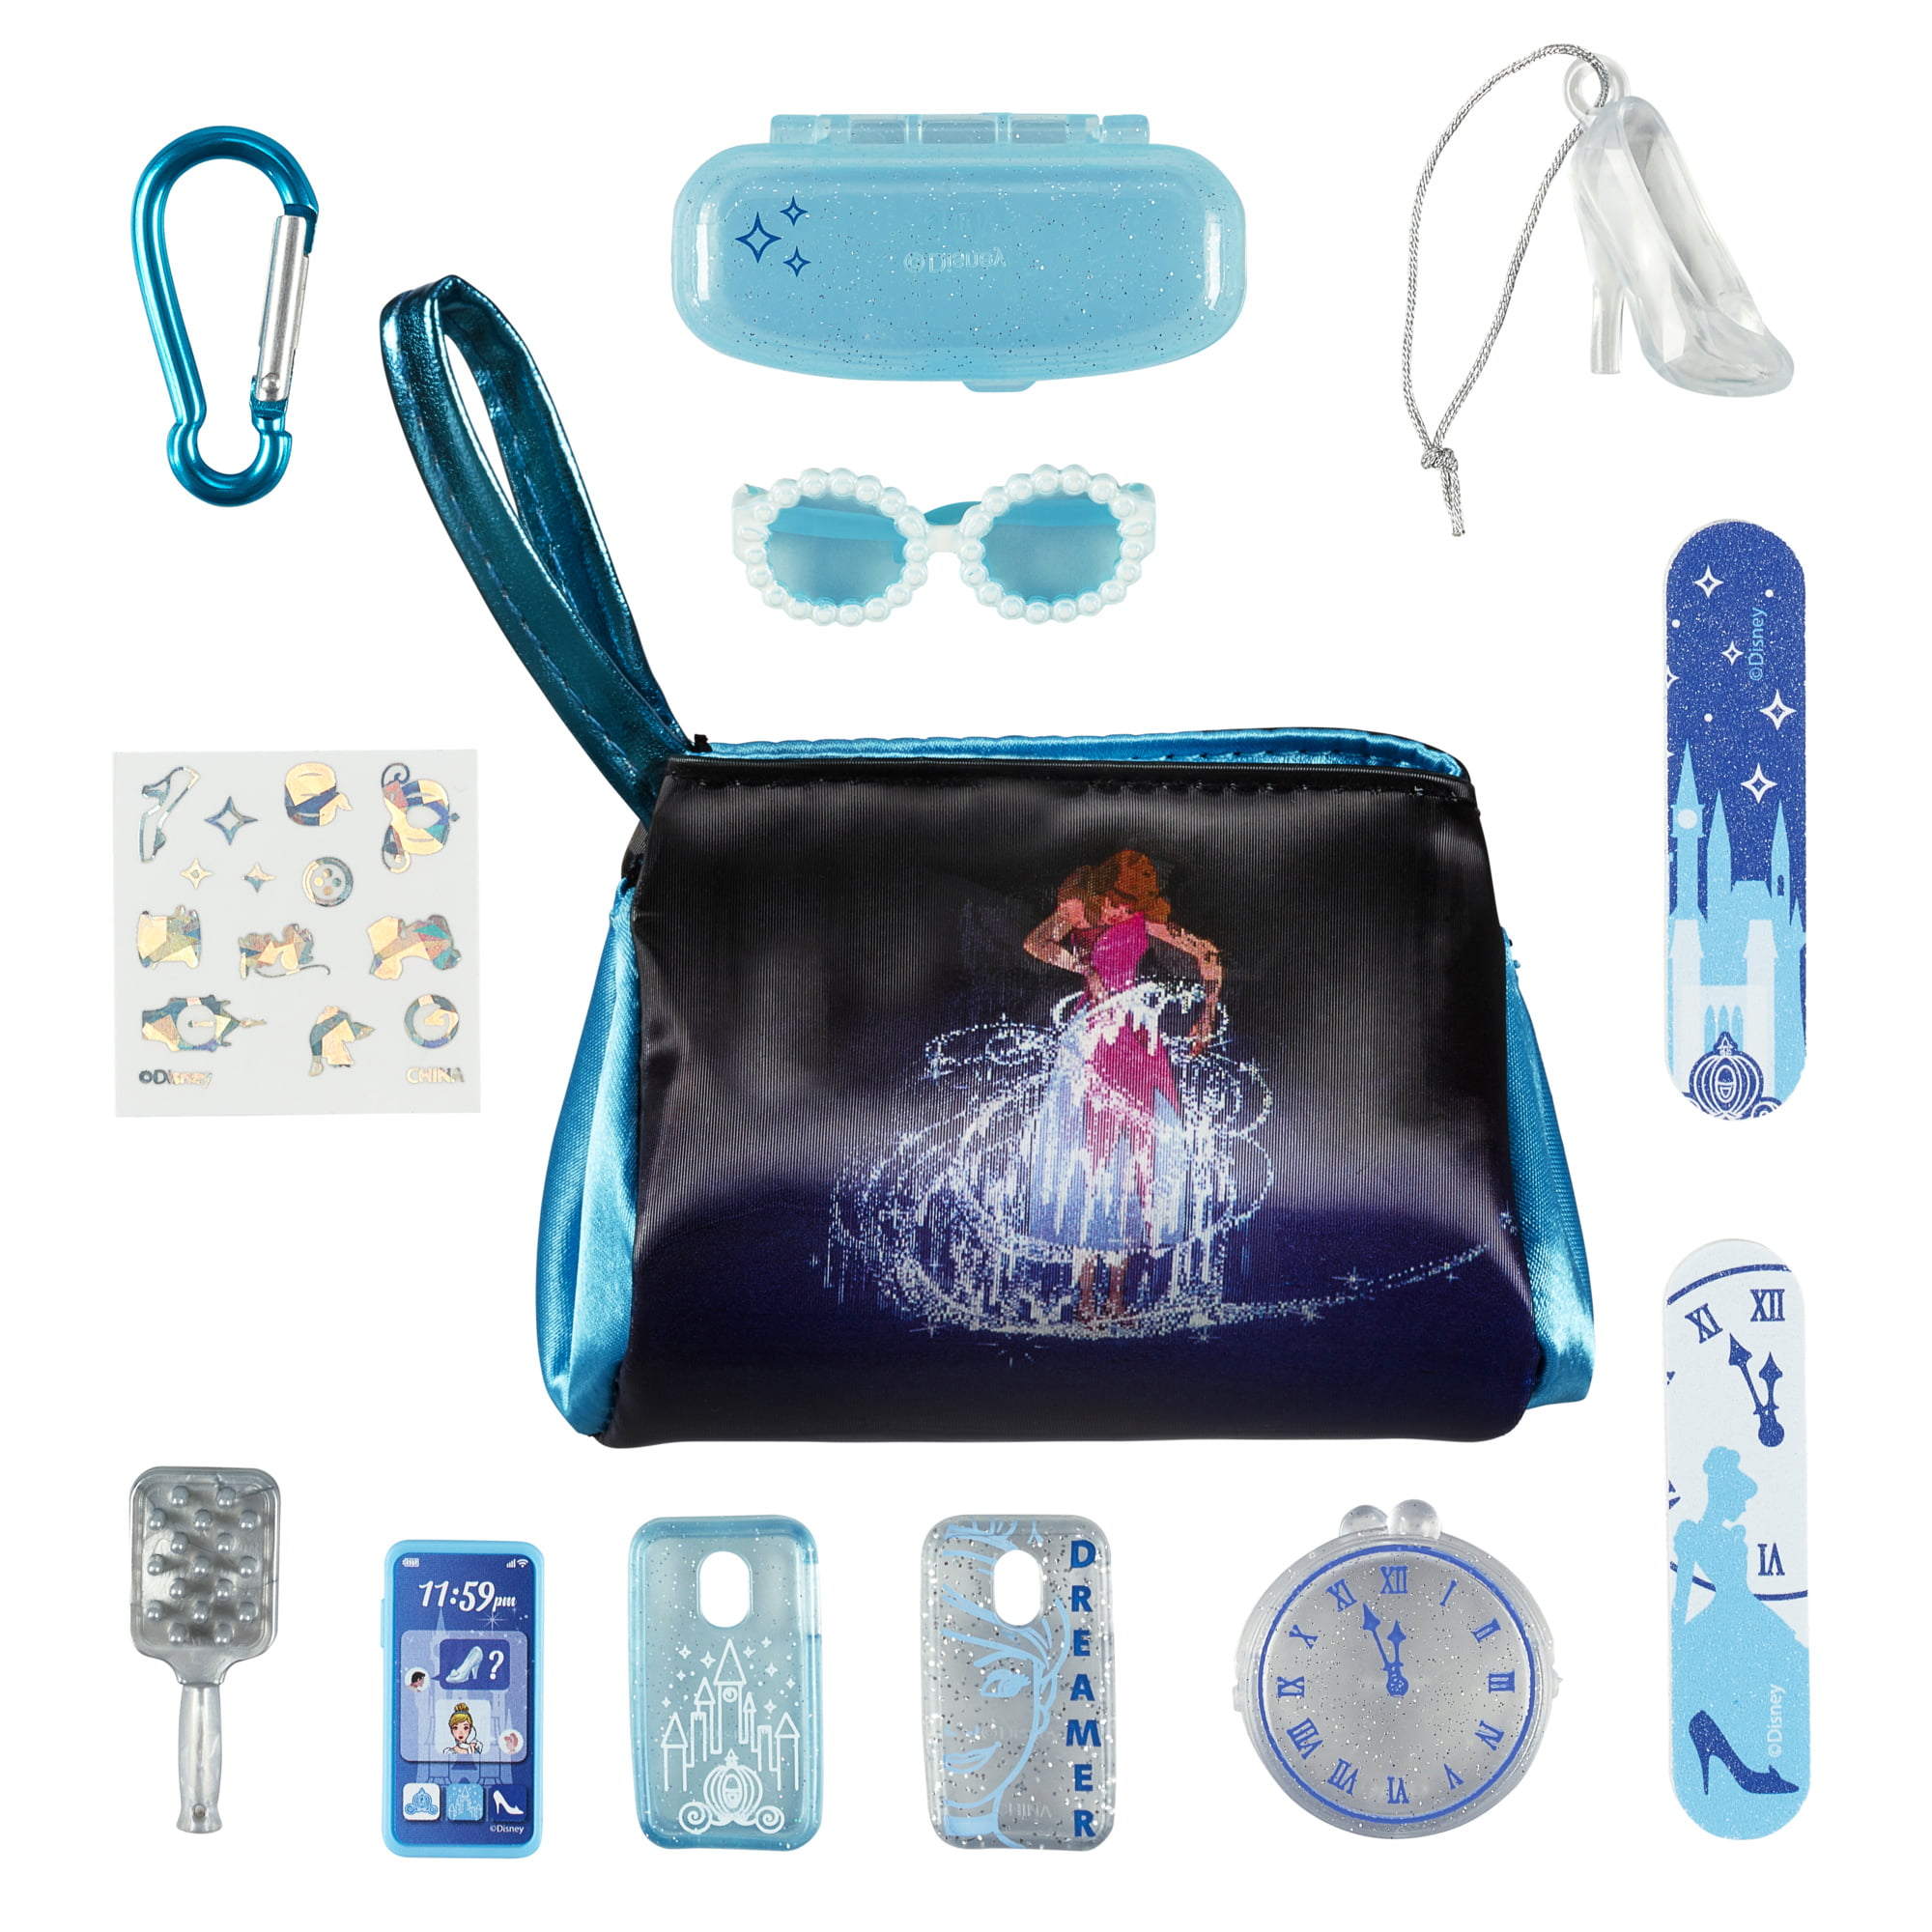 Real Littles - Collectible micro Disney bags with 7 surprises